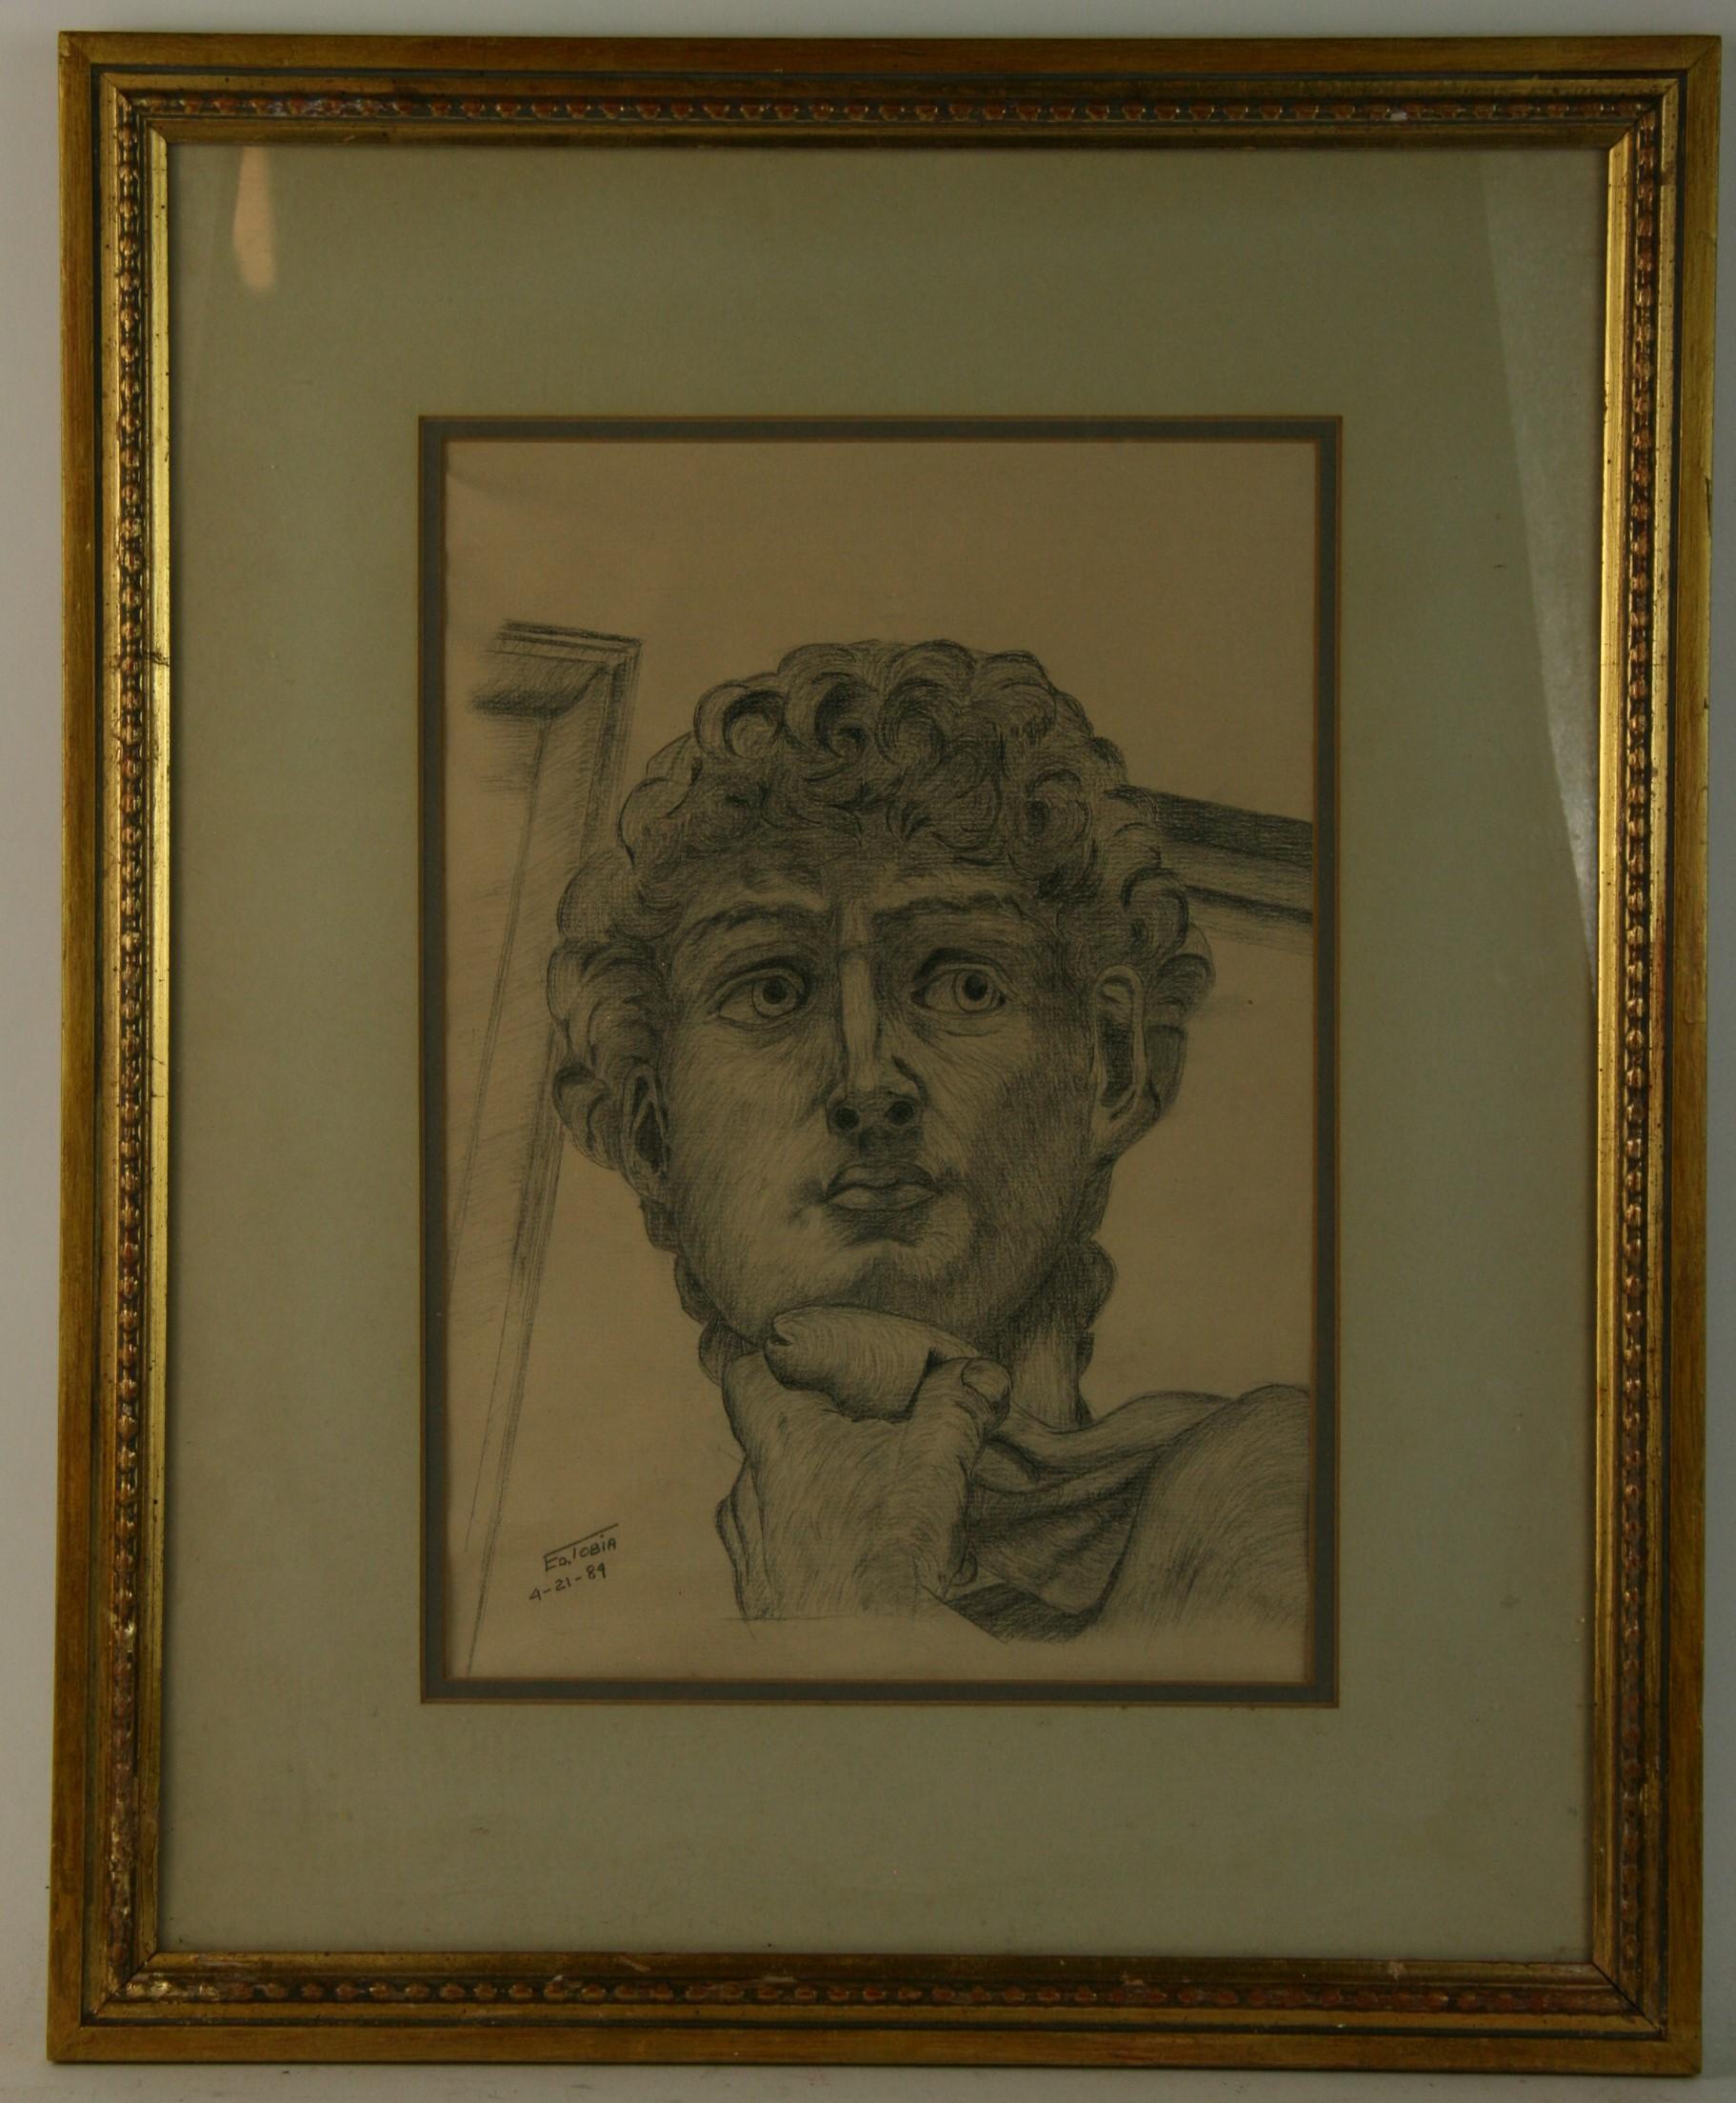 3580 charcoal drawing on paper
Set in a gilt wood frame
Image size 13 x 9